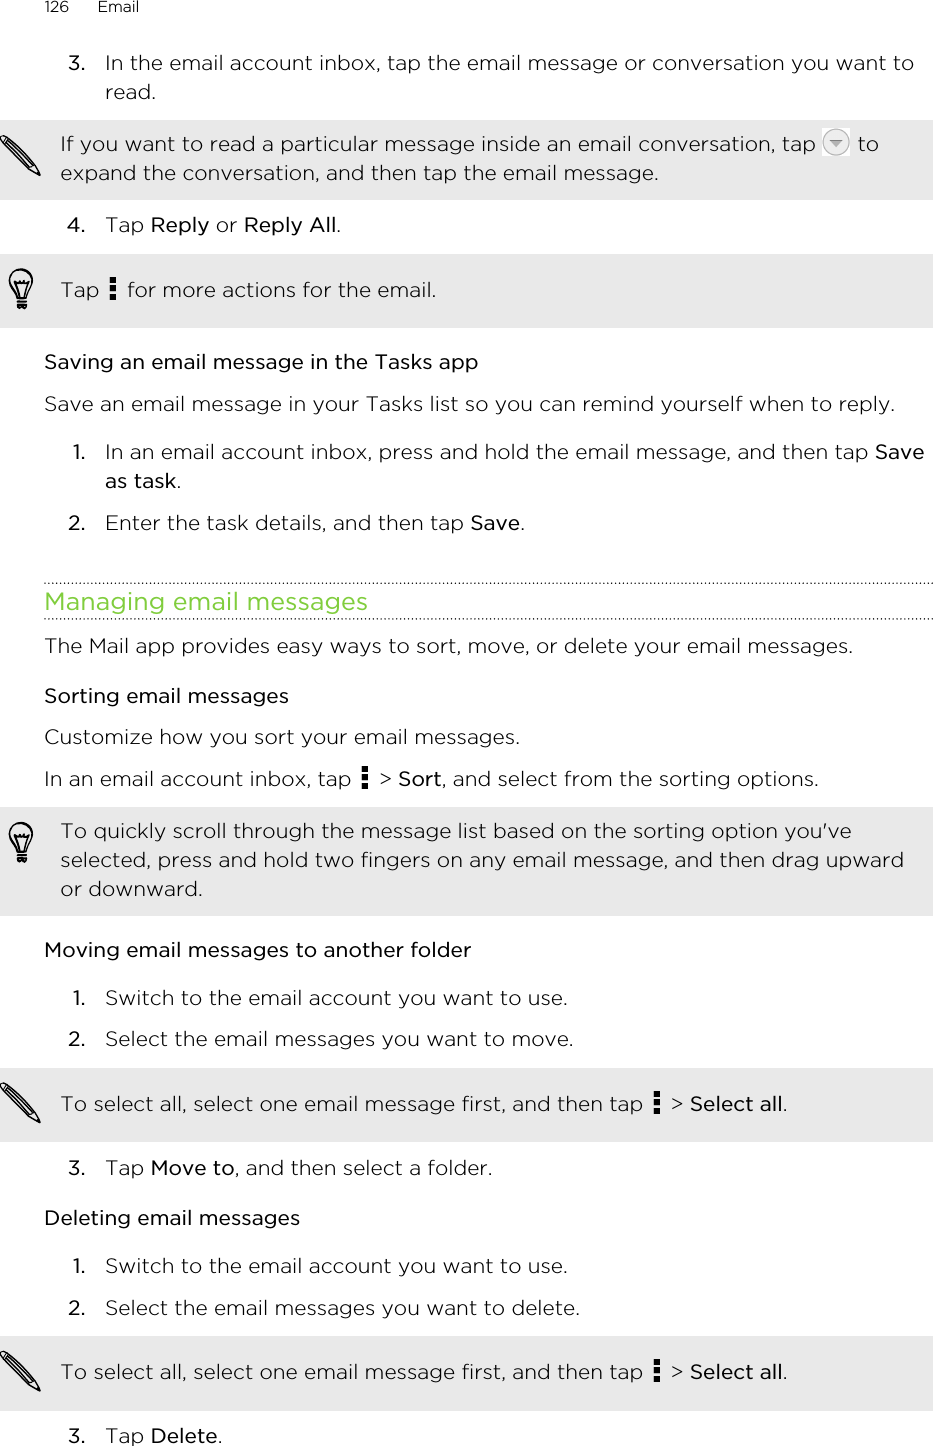 3. In the email account inbox, tap the email message or conversation you want toread. If you want to read a particular message inside an email conversation, tap   toexpand the conversation, and then tap the email message.4. Tap Reply or Reply All. Tap   for more actions for the email.Saving an email message in the Tasks appSave an email message in your Tasks list so you can remind yourself when to reply.1. In an email account inbox, press and hold the email message, and then tap Saveas task.2. Enter the task details, and then tap Save.Managing email messagesThe Mail app provides easy ways to sort, move, or delete your email messages.Sorting email messagesCustomize how you sort your email messages.In an email account inbox, tap   &gt; Sort, and select from the sorting options.To quickly scroll through the message list based on the sorting option you&apos;veselected, press and hold two fingers on any email message, and then drag upwardor downward.Moving email messages to another folder1. Switch to the email account you want to use.2. Select the email messages you want to move. To select all, select one email message first, and then tap   &gt; Select all.3. Tap Move to, and then select a folder.Deleting email messages1. Switch to the email account you want to use.2. Select the email messages you want to delete. To select all, select one email message first, and then tap   &gt; Select all.3. Tap Delete.126 EmailHTC Confidential for Certification HTC Confidential for Certification 